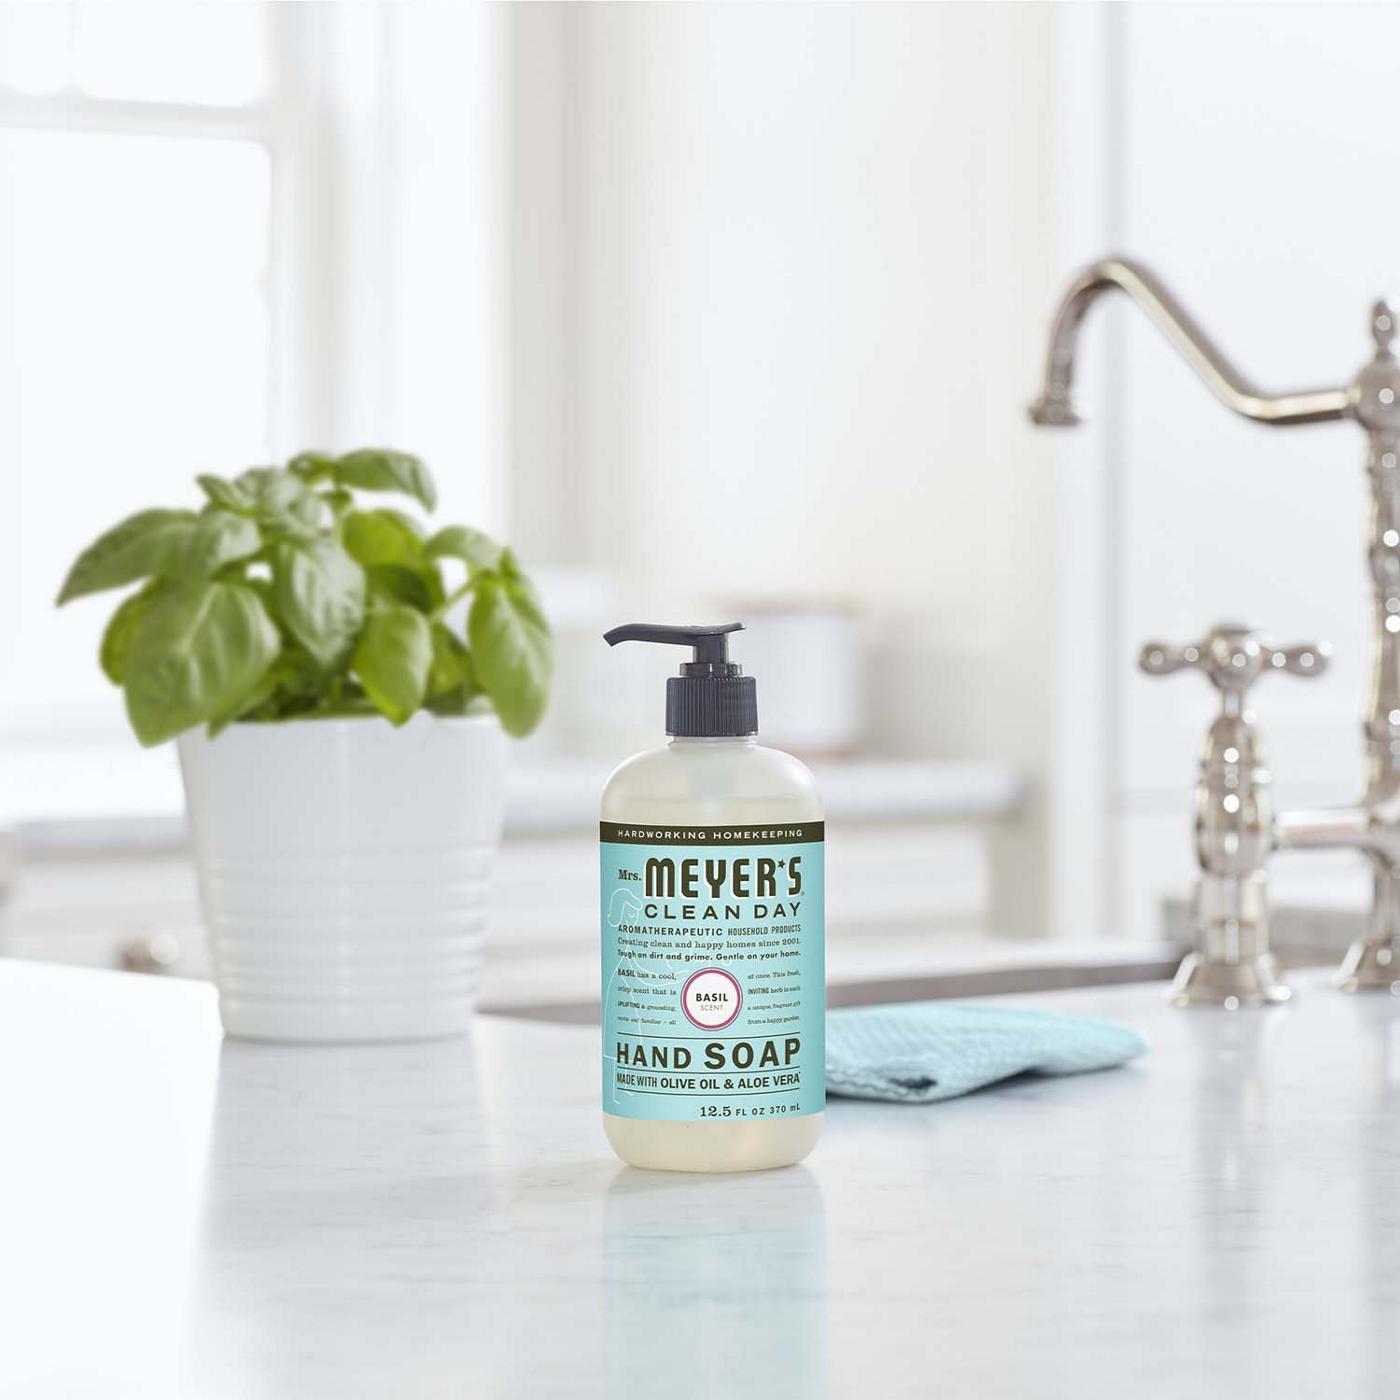 Mrs. Meyer's Clean Day Basil Scent Liquid Hand Soap; image 2 of 6